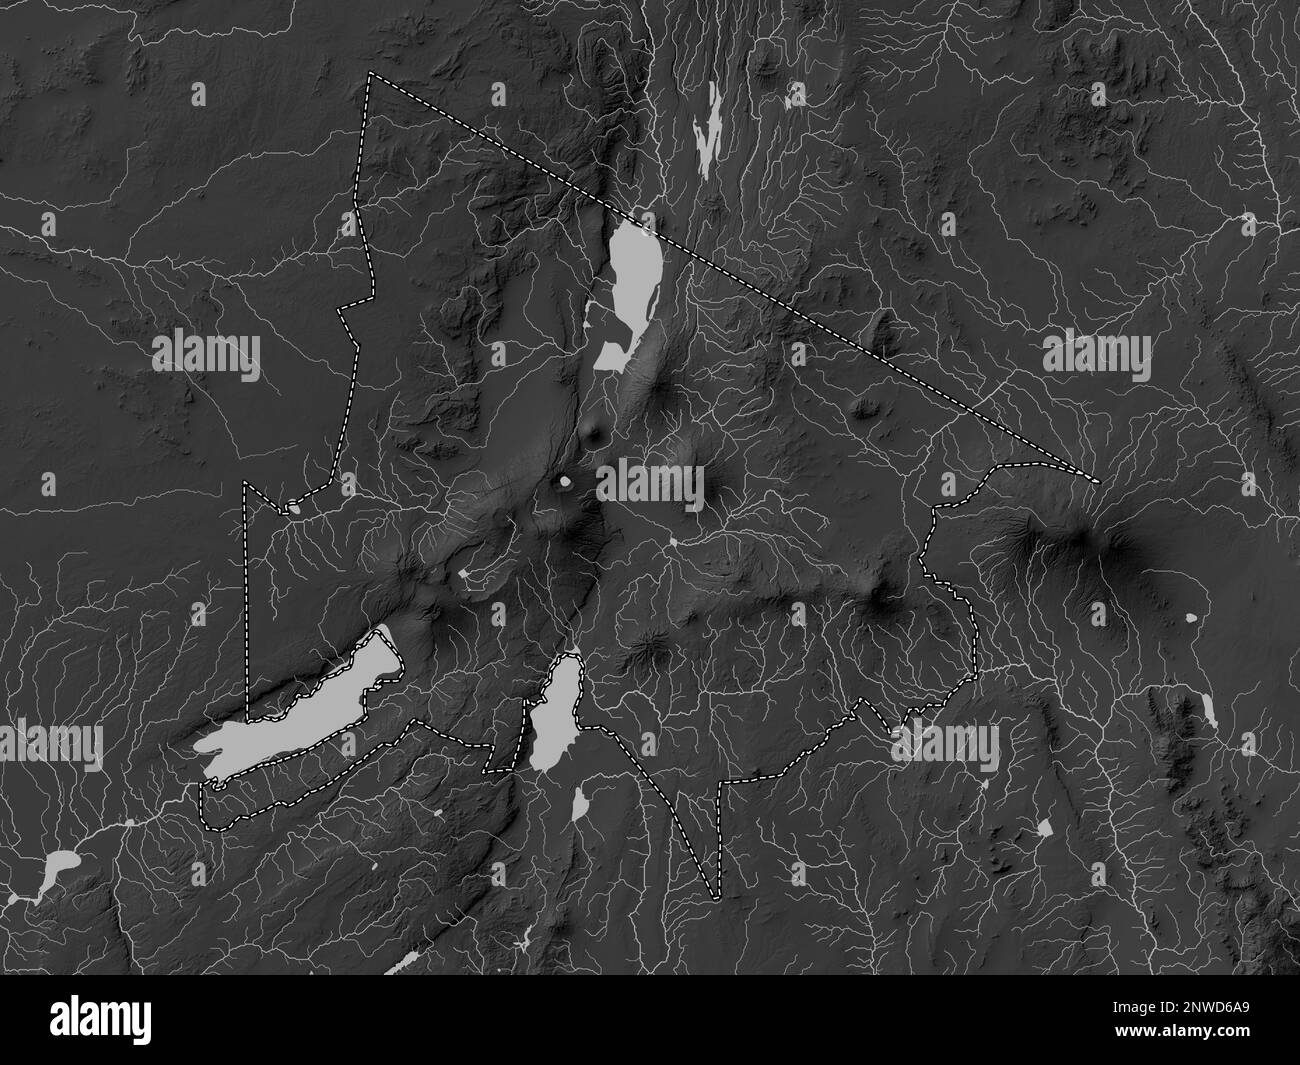 Arusha, region of Tanzania. Grayscale elevation map with lakes and rivers Stock Photo